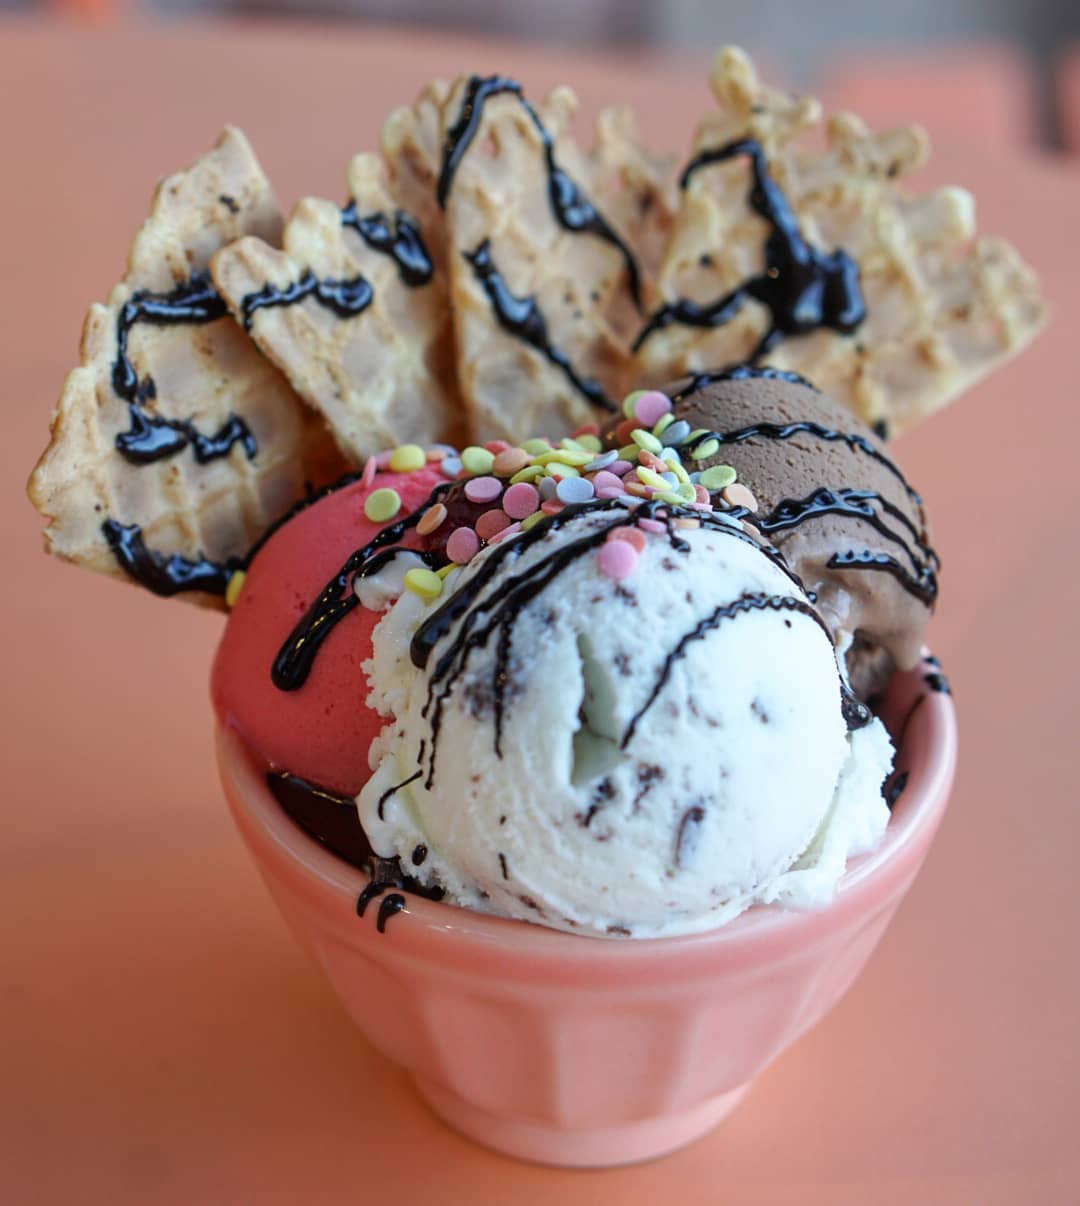 A bowl of ice cream from Fainting Goat Gelato